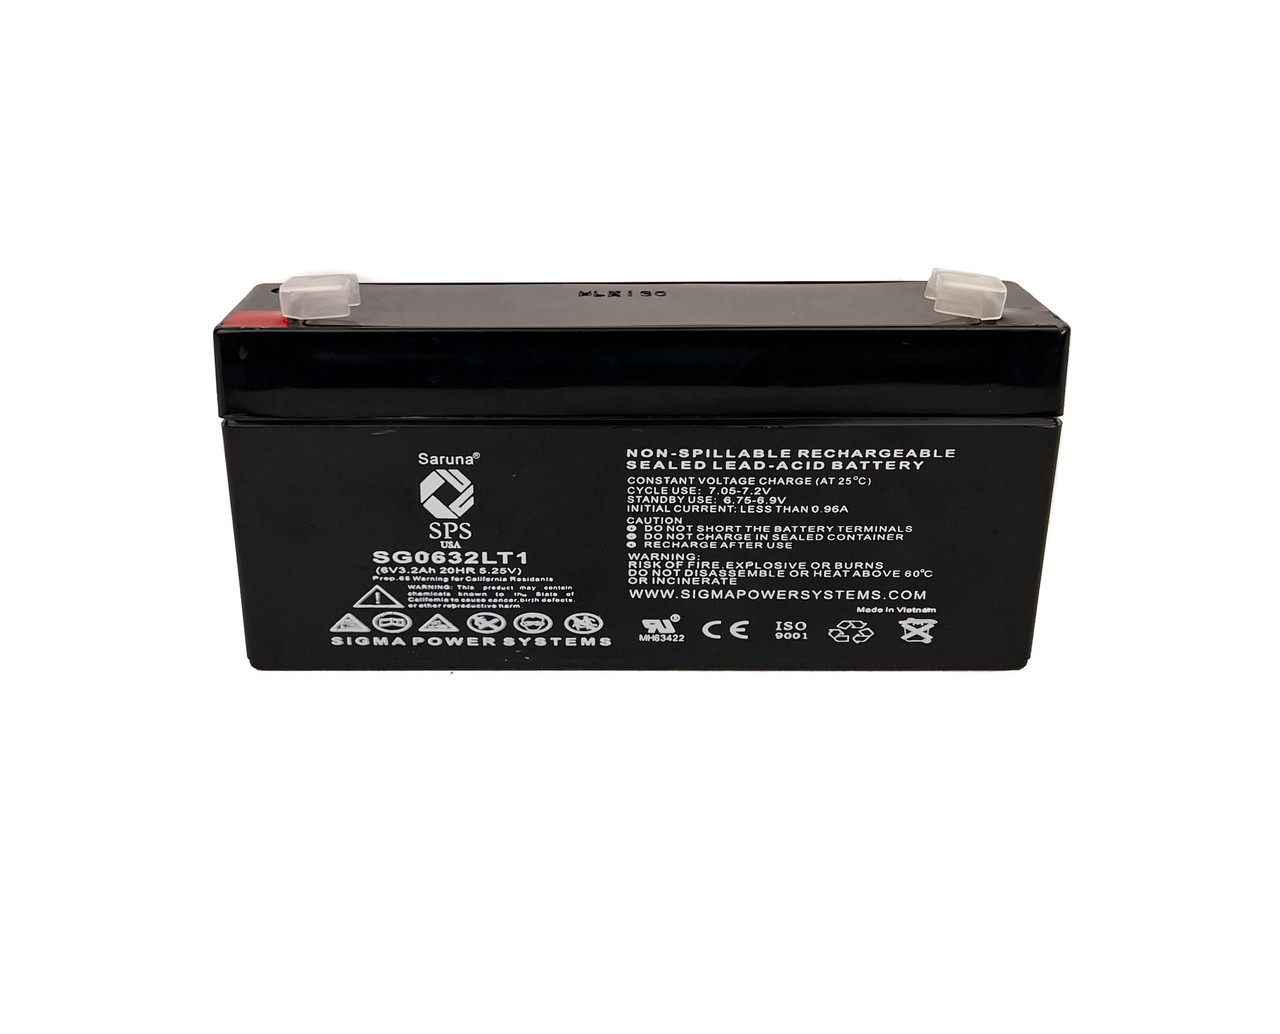 Raion Power RG0632LT1 6V 3.2Ah Compatible Replacement Battery for Health o meter 63653 Pediatric Scale